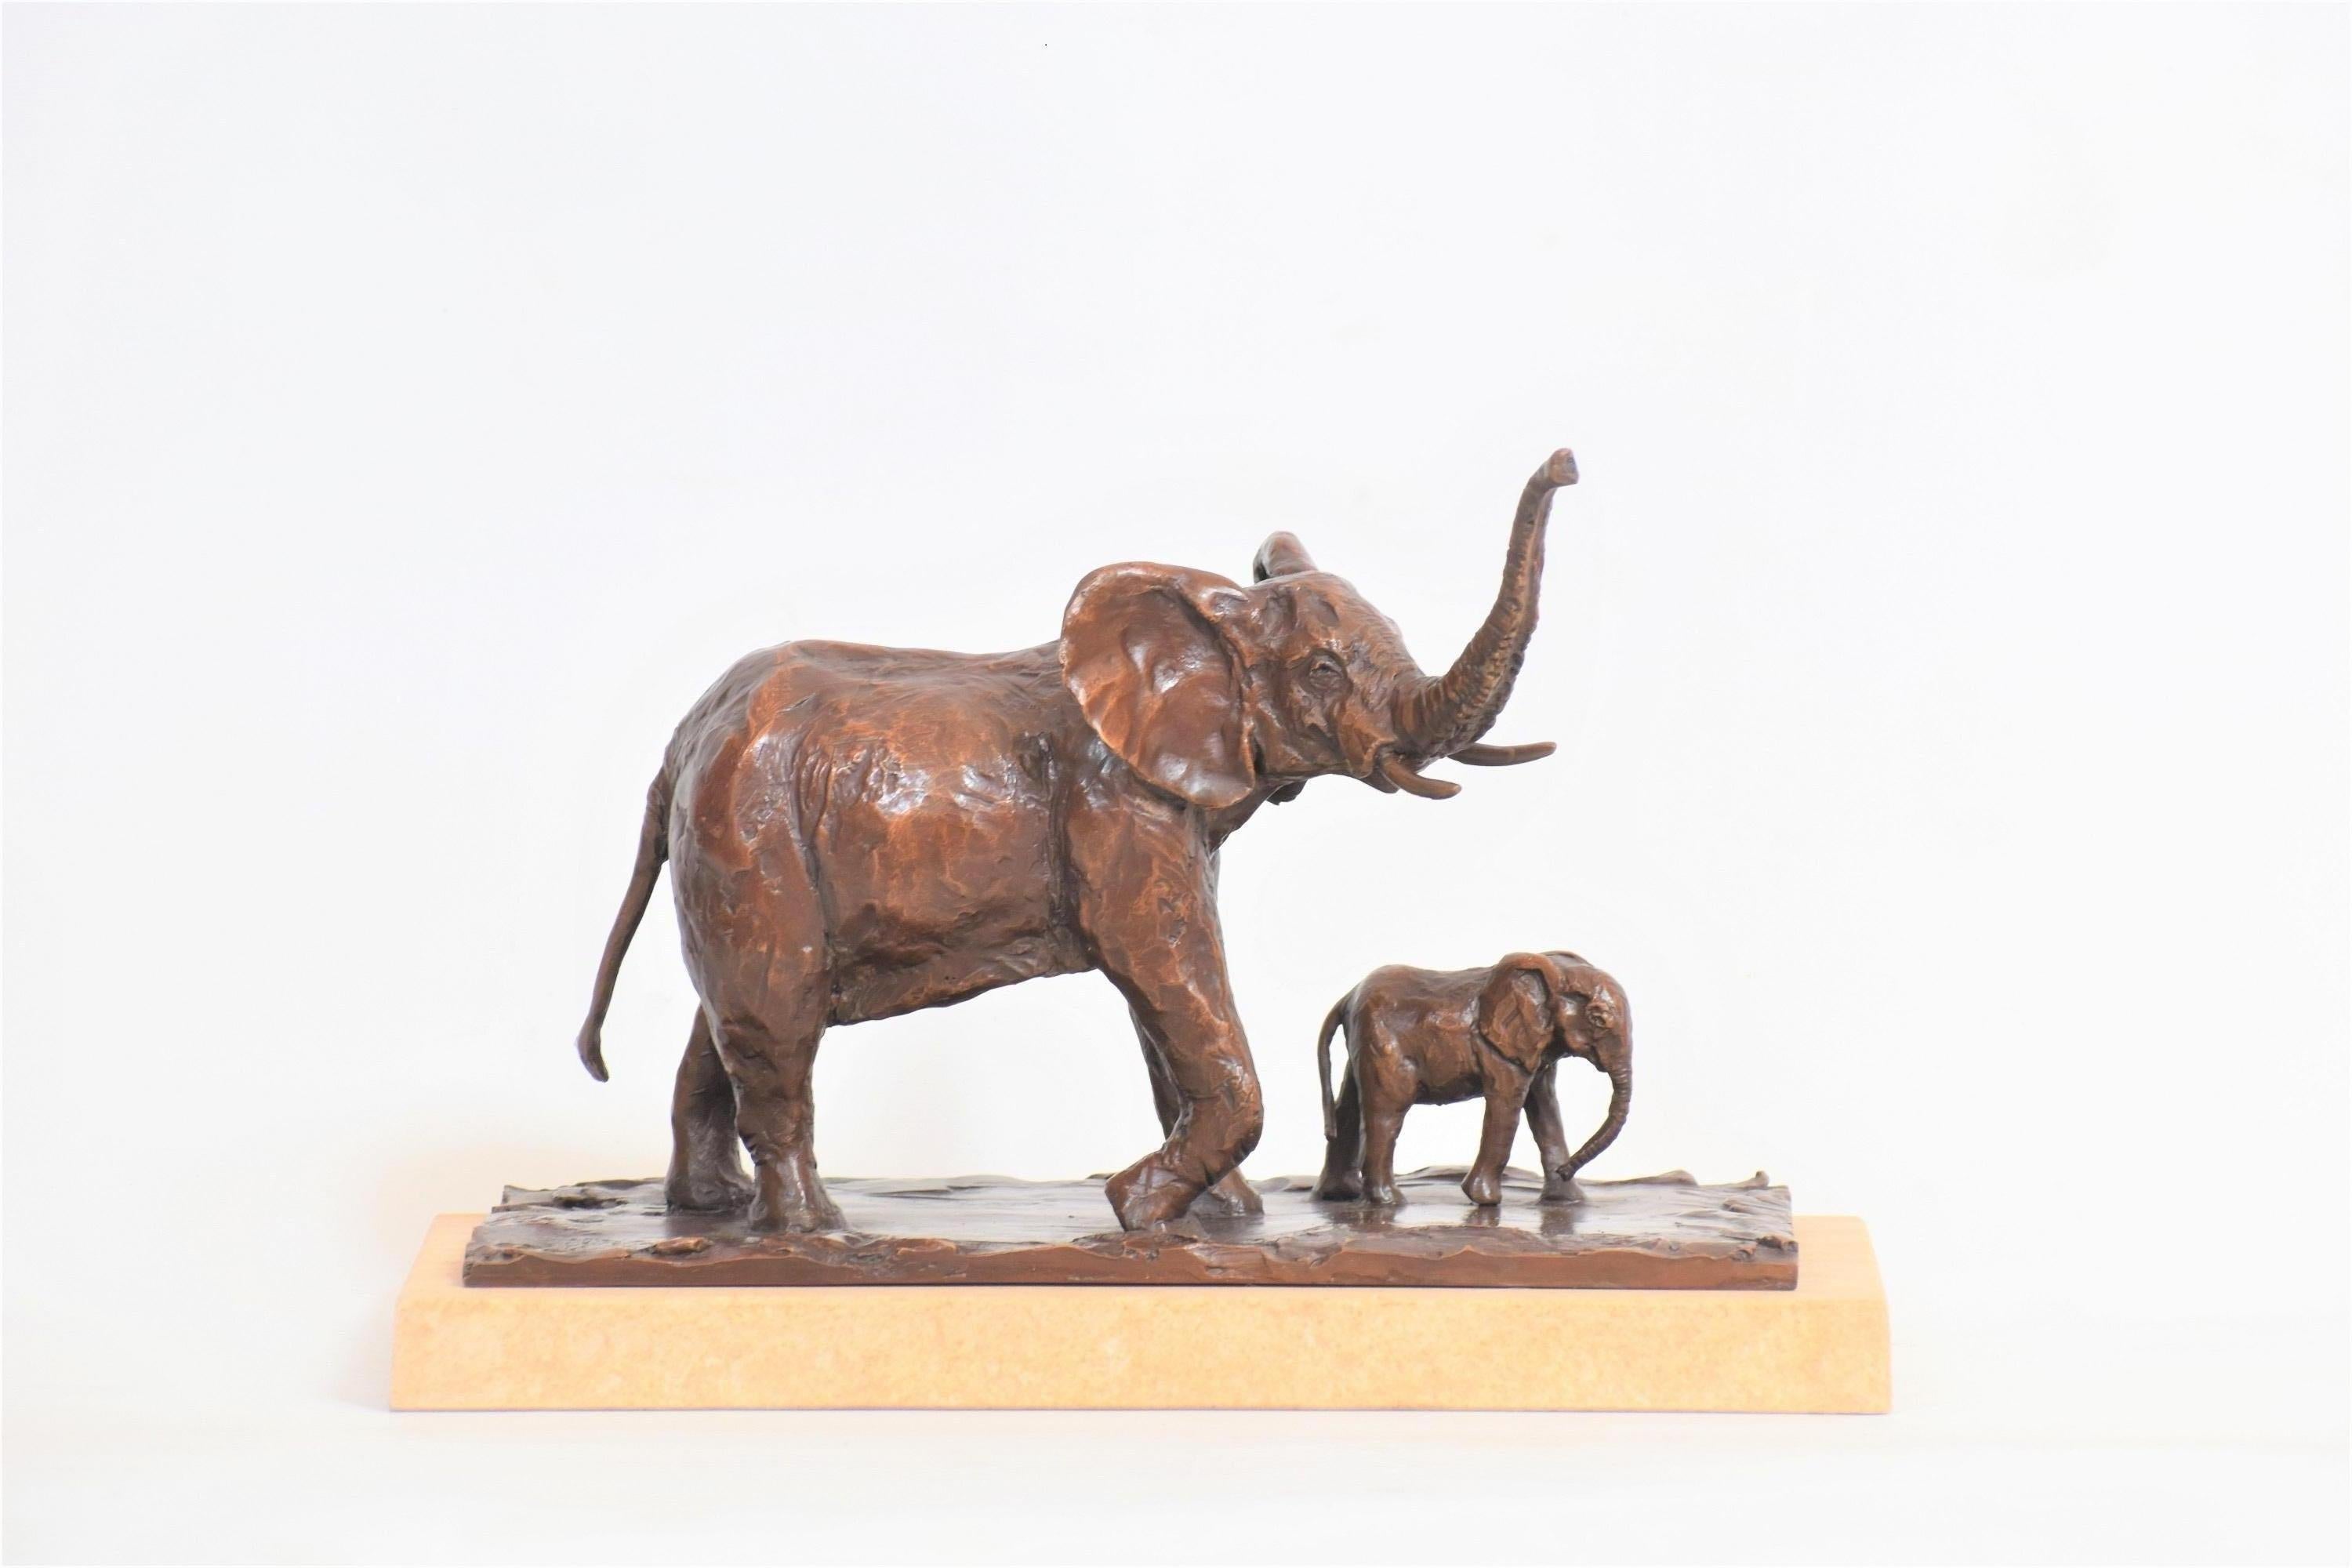 Homage in bronze to new life and a tribute to a majestic creature that represents the soul of Africa.

The Surprise - New Life - Mother & Calf - Bronze Elephant Sculpture, Limited Edition of 24, L 24 cm x W 12 cm x H 17 cm including Sandstone